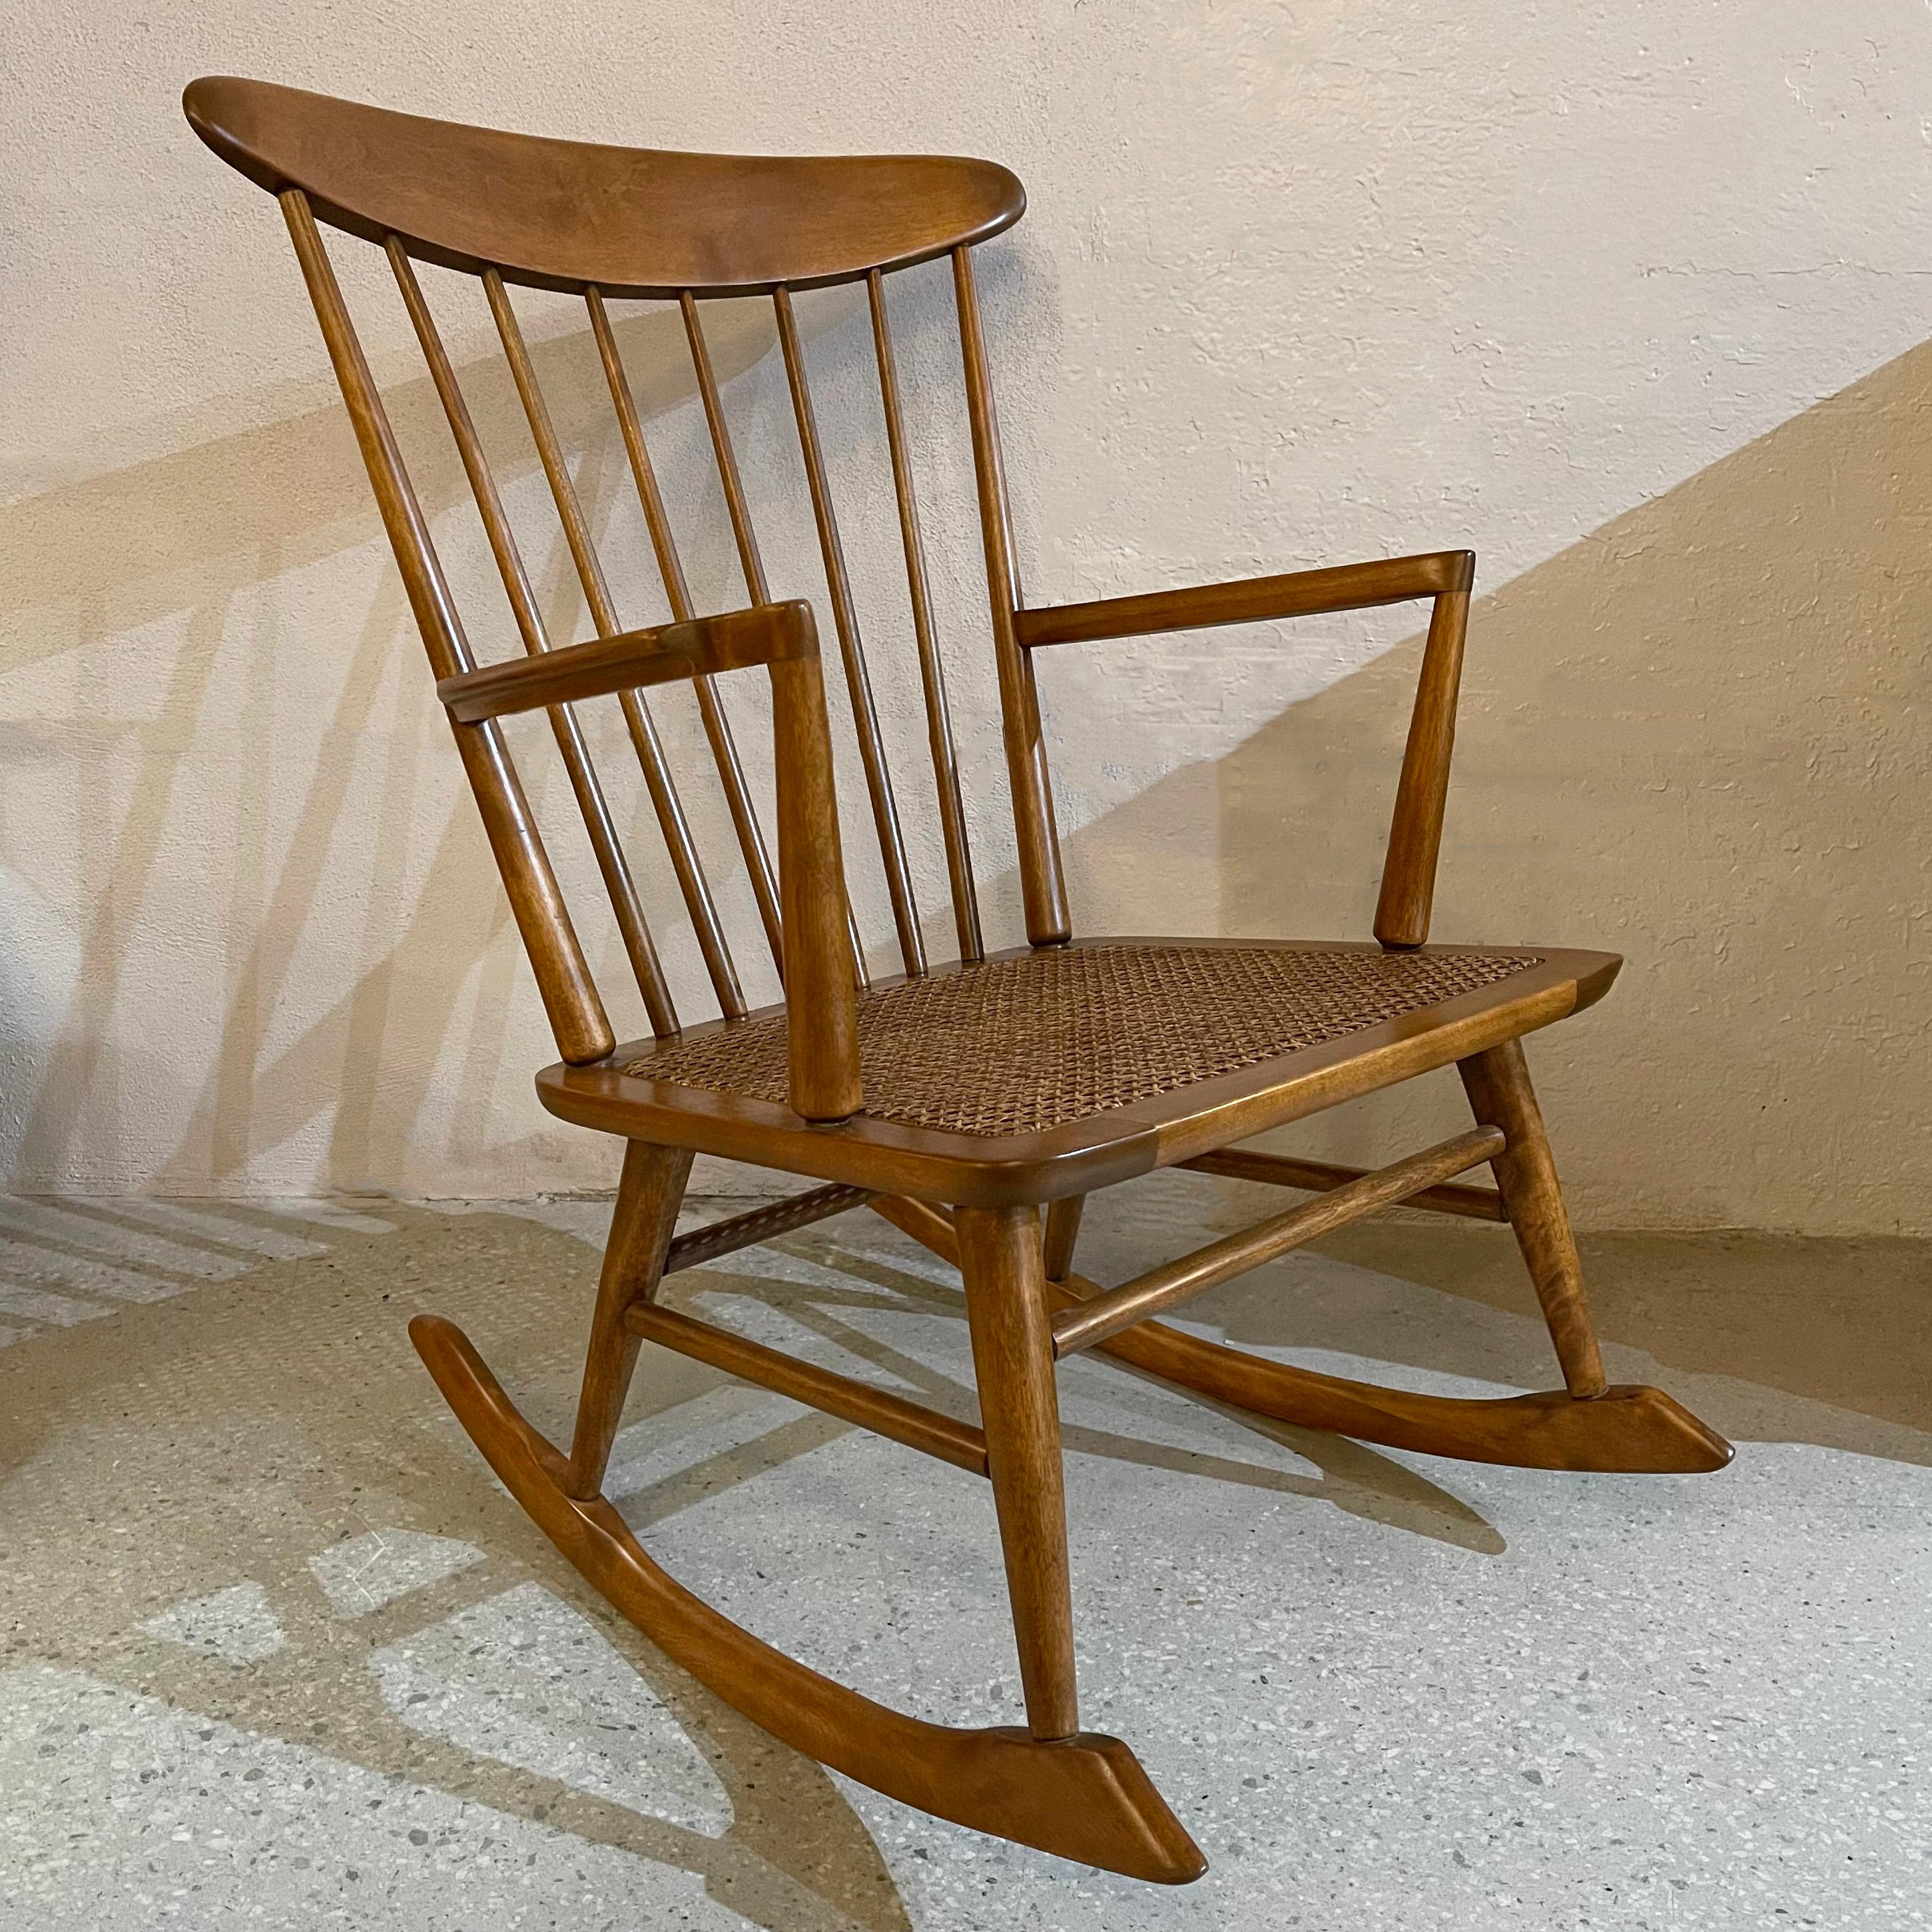 Mid-century modern, beech wood, rocking chair features a high spindle back with newly caned seat. The chair is American but has a Scandinavian feel with it's sculpted frame and tapered spindles. Arm height is 24 inches.